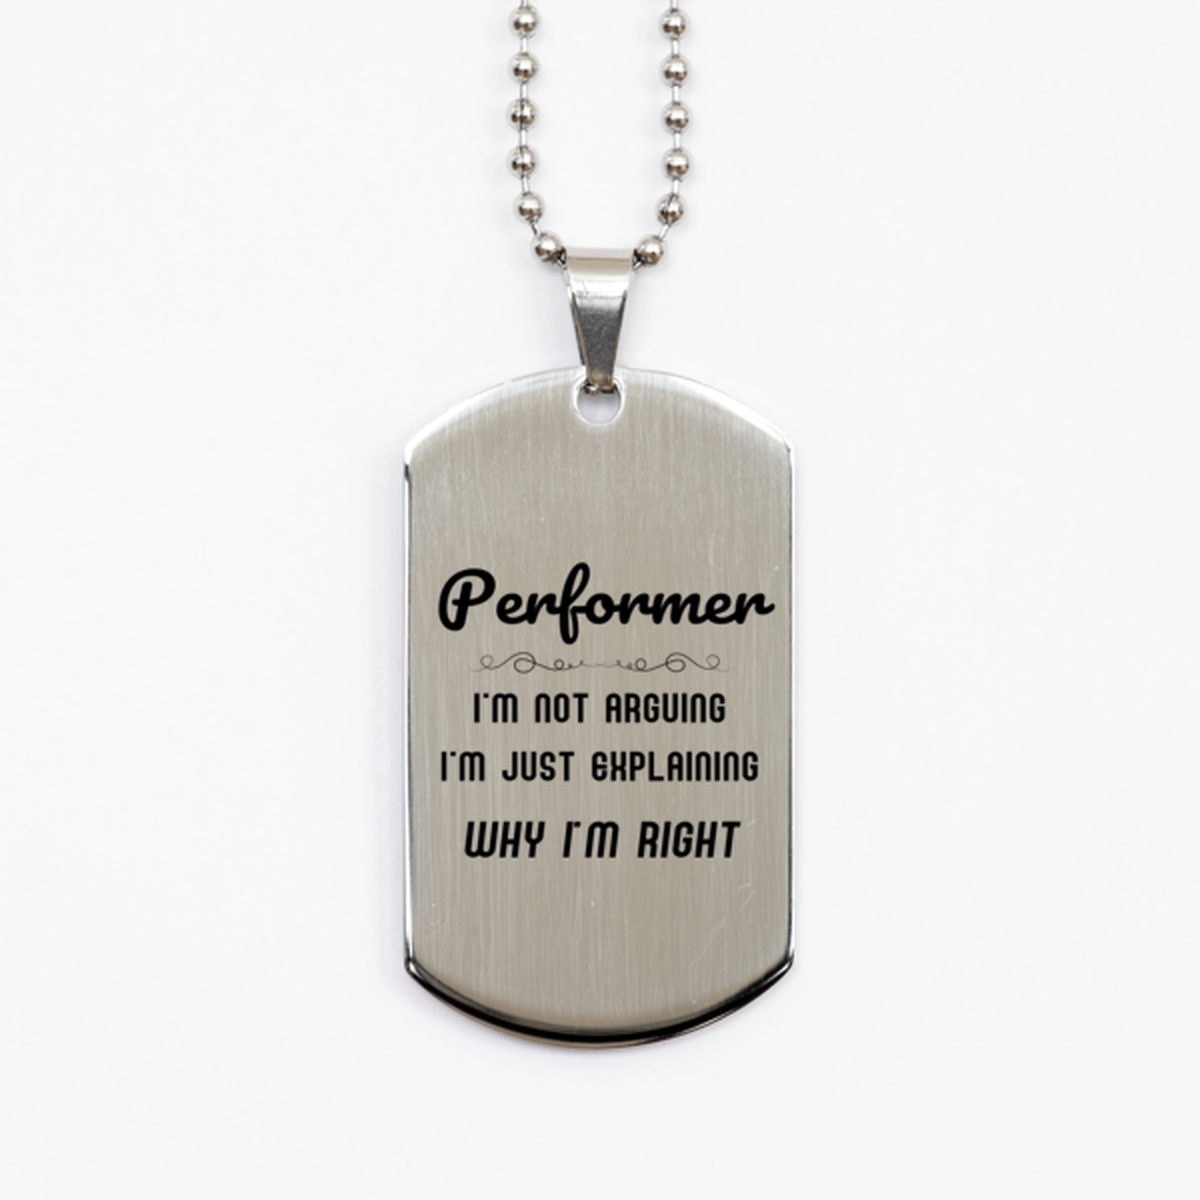 Performer I'm not Arguing. I'm Just Explaining Why I'm RIGHT Silver Dog Tag, Funny Saying Quote Performer Gifts For Performer Graduation Birthday Christmas Gifts for Men Women Coworker